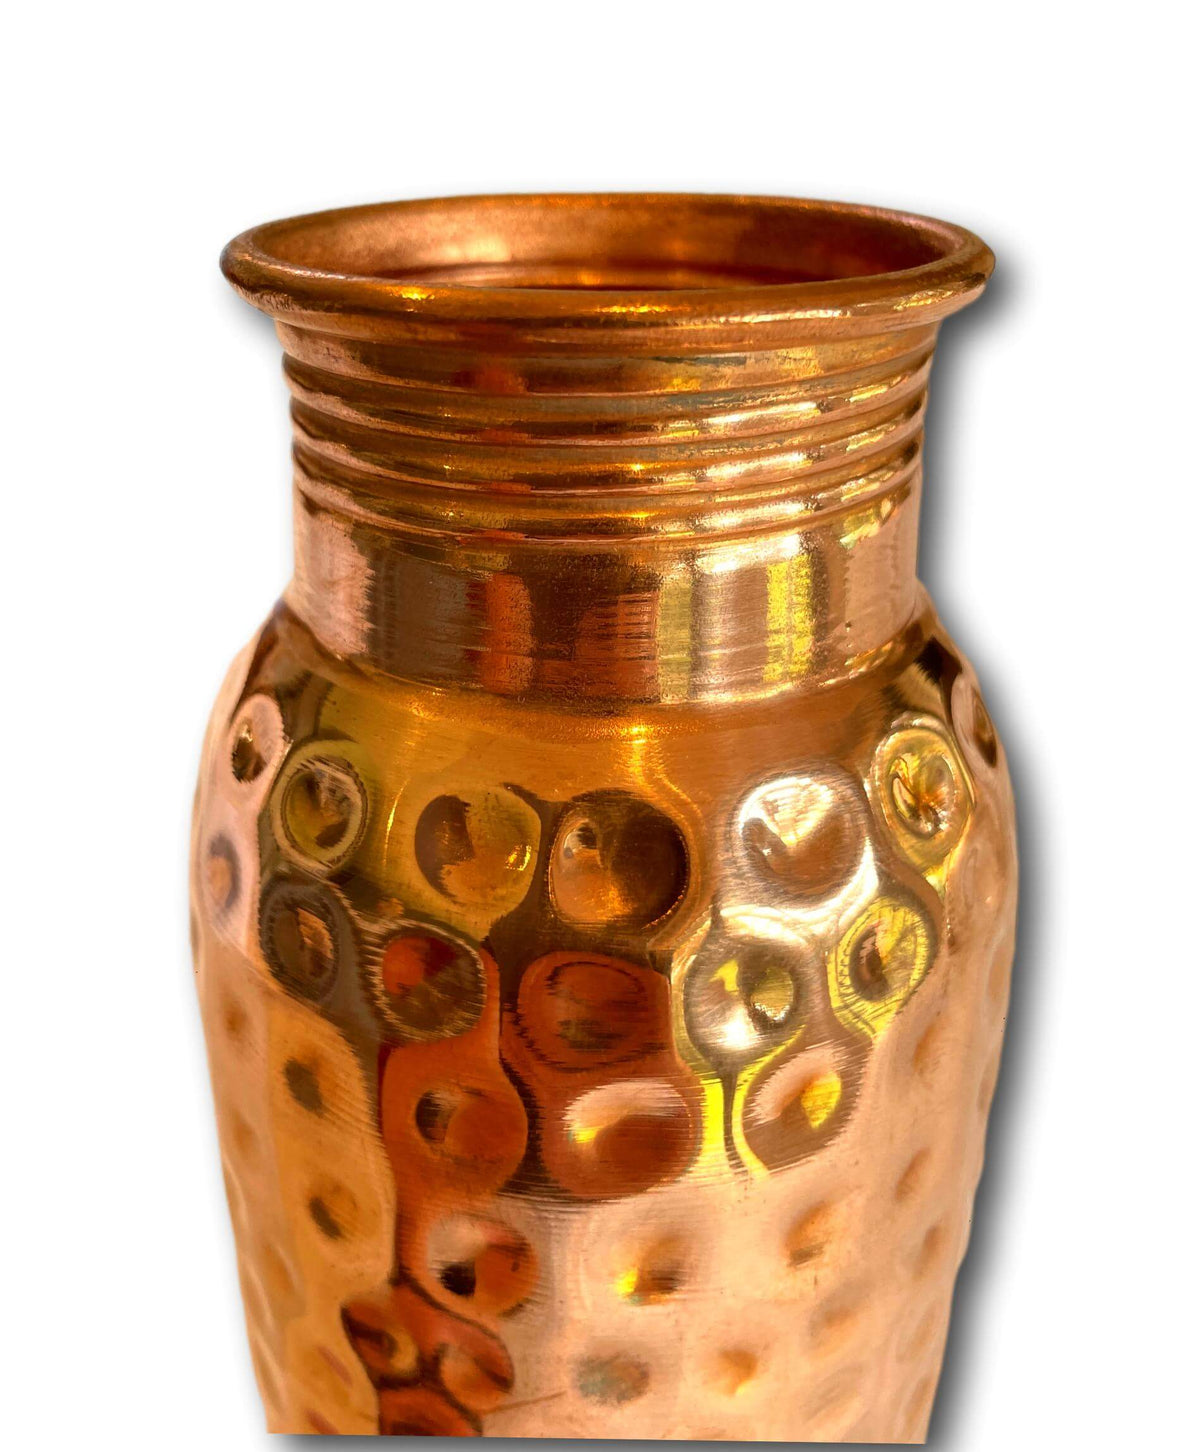 1L AYURVEDIC PURE COPPER WATER BOTTLE - TRADITIONALLY HANDMADE IN NEPAL 🇳🇵 + SINGING BOWLS AND MEDITATION